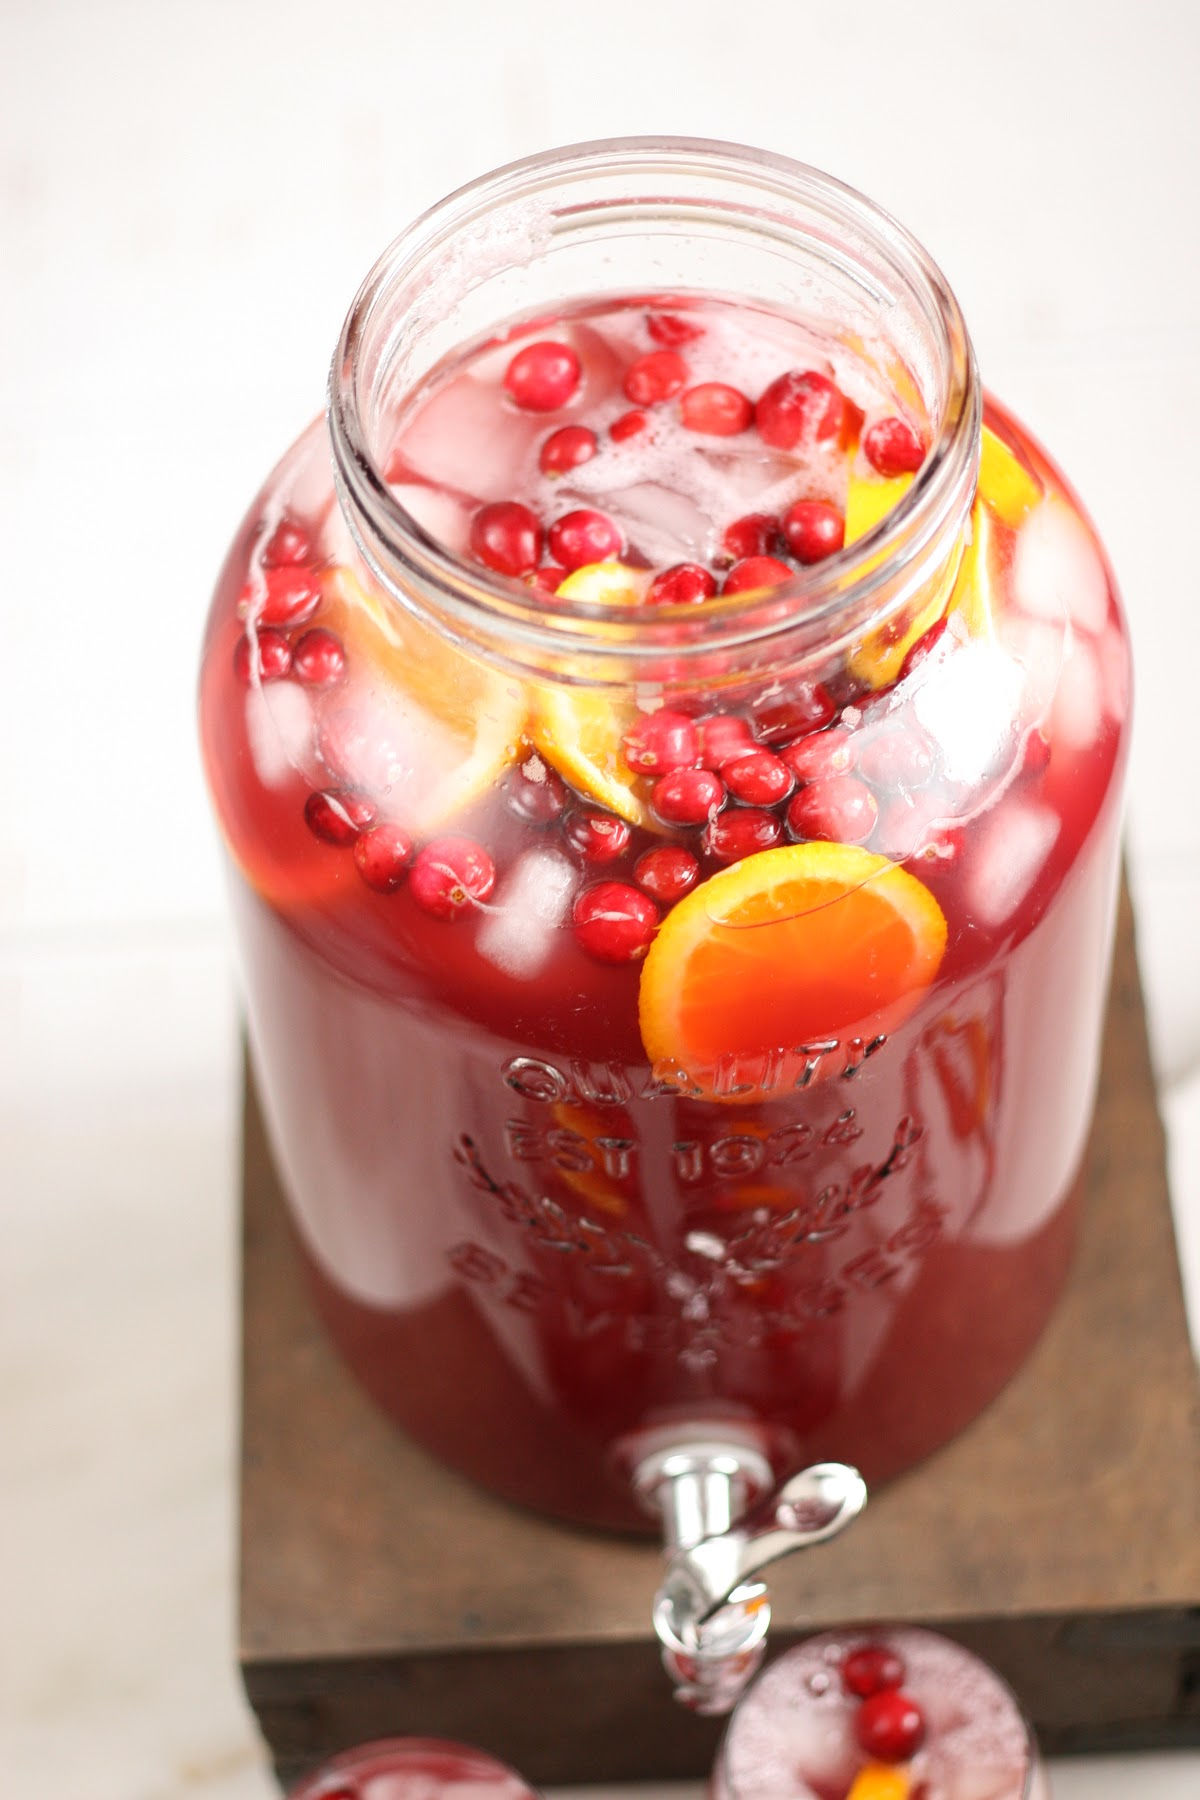 Overhead shot of clear glass drink dispenser of holiday punch, cranberries, orange slices and ice cubes.